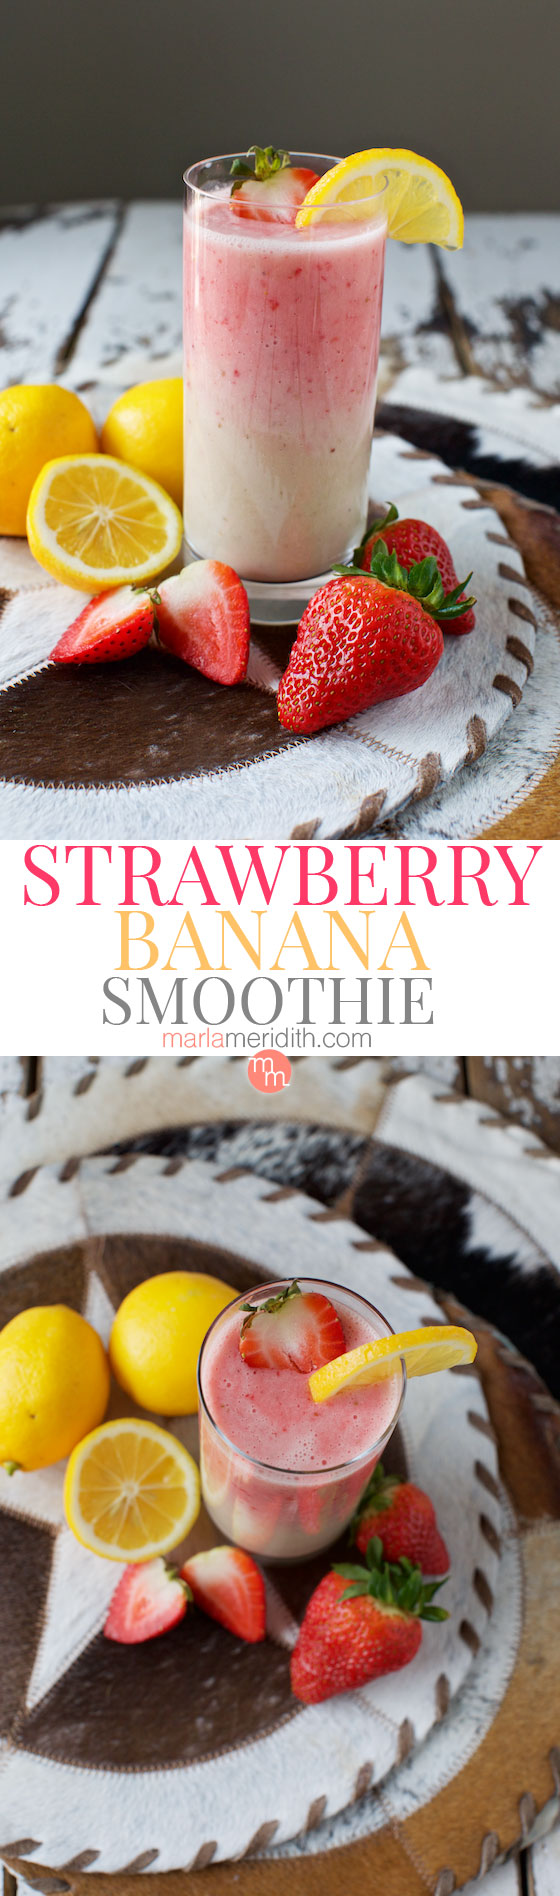 Strawberry Banana Smoothie recipe. Delicious on steamy summer days! MarlaMeridith.com ( @marlameridith ) #vegan #smoothie